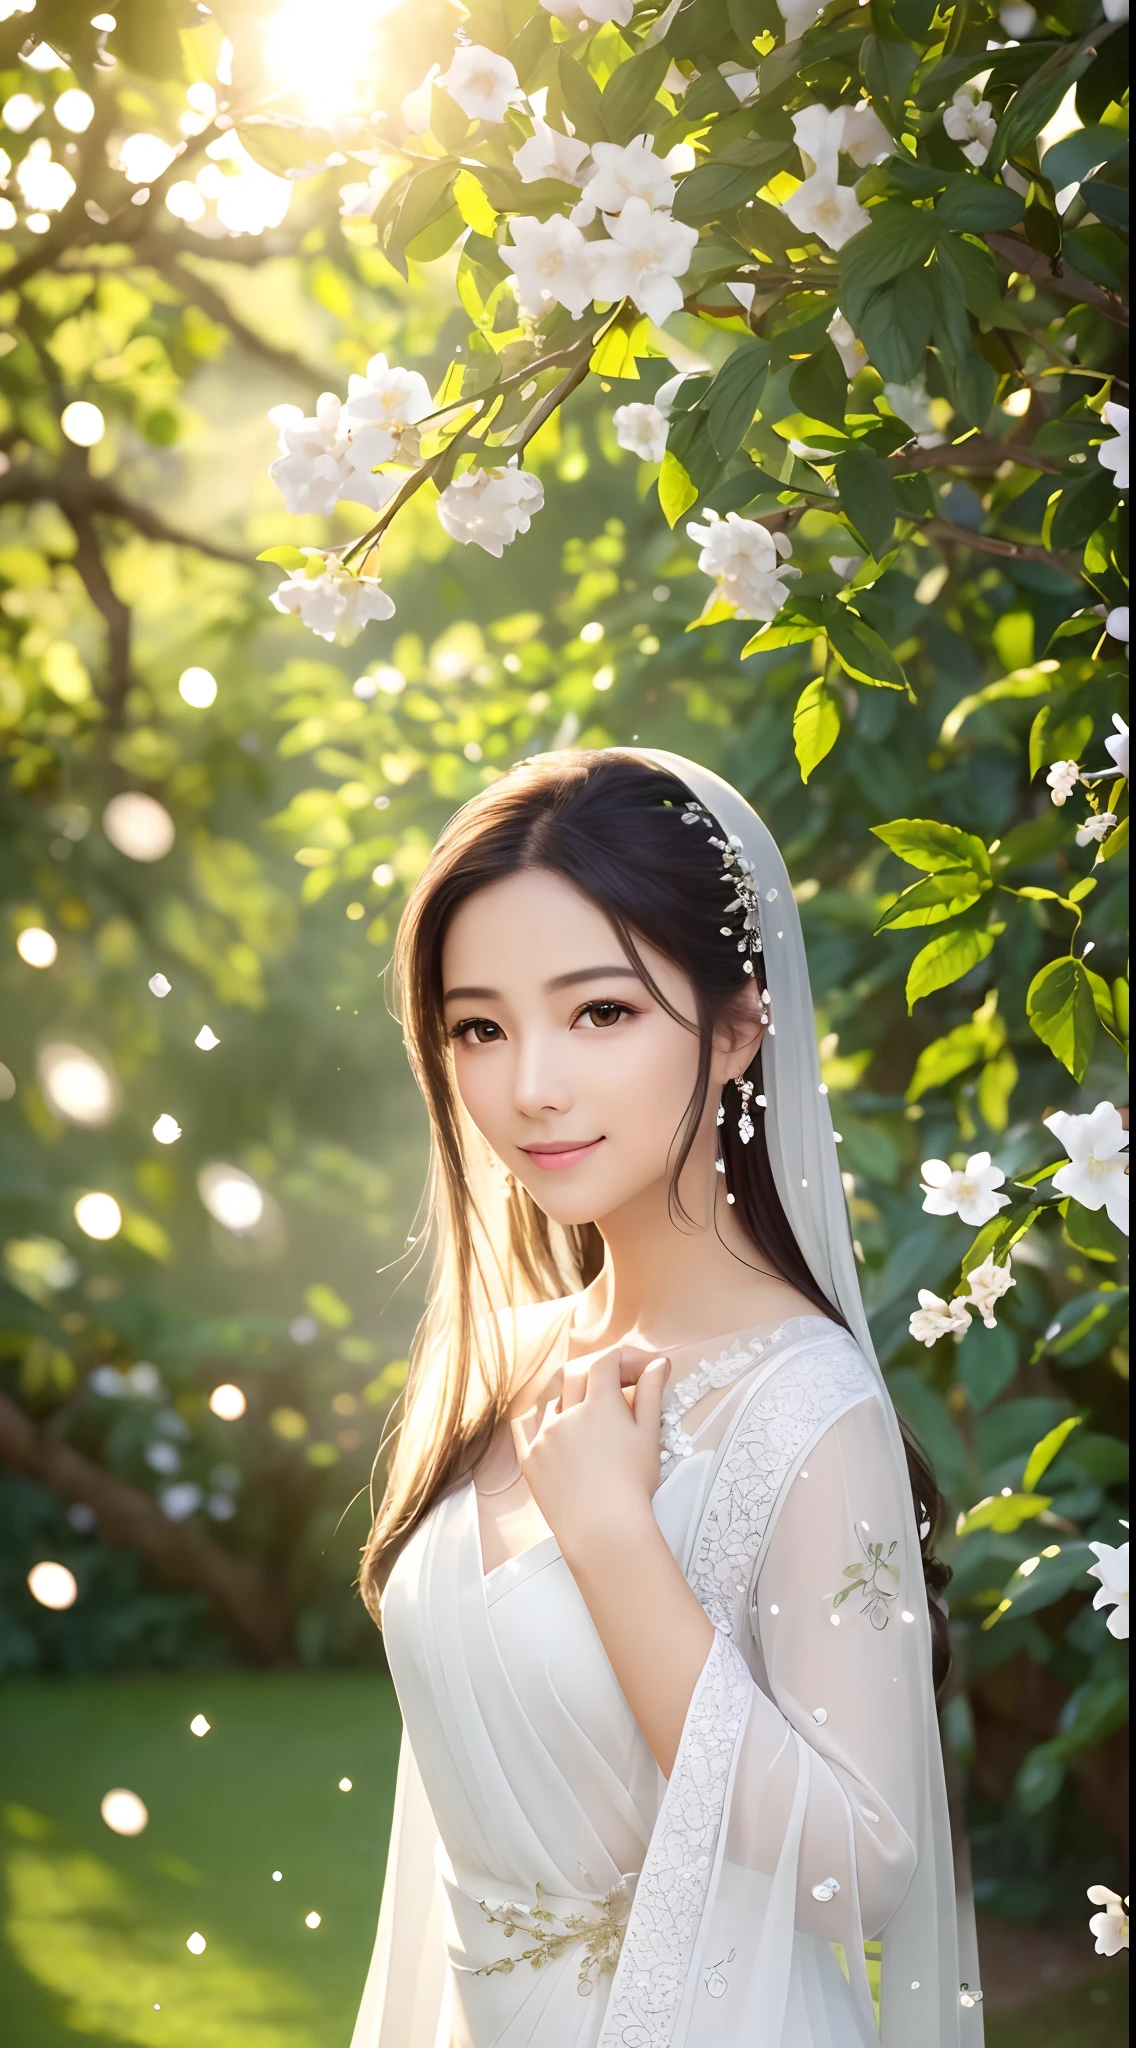 (Best quality,4K,A high resolution,Ultra-detailed,Realistic:1.37),Vivid colors,Sunlight,llight rays,bergamot,white blossoms,Beautiful girl,Exquisite features,Flowing hair,Serene expression,Garden setting,Elaborate dress,Soft sunlight,Gentle breeze,Cheerful ambiance,Backlit scene,a hint of smile,ethereal glowing,Fresh in the morning,Long shadows,harmony of nature,subtle reflections,Natural beauty,Twinkling dewdrops,Clear detail,serenity and calm,Sublime ingredients,Arrive at the branch,whispering leaves,Aromatherapy petals,with light glowing,Sparkling highlights,Subtle shadows,Soft focus,Sublime beauty,Whisper natural,Fantastical Atmosphere,Illuminated background.